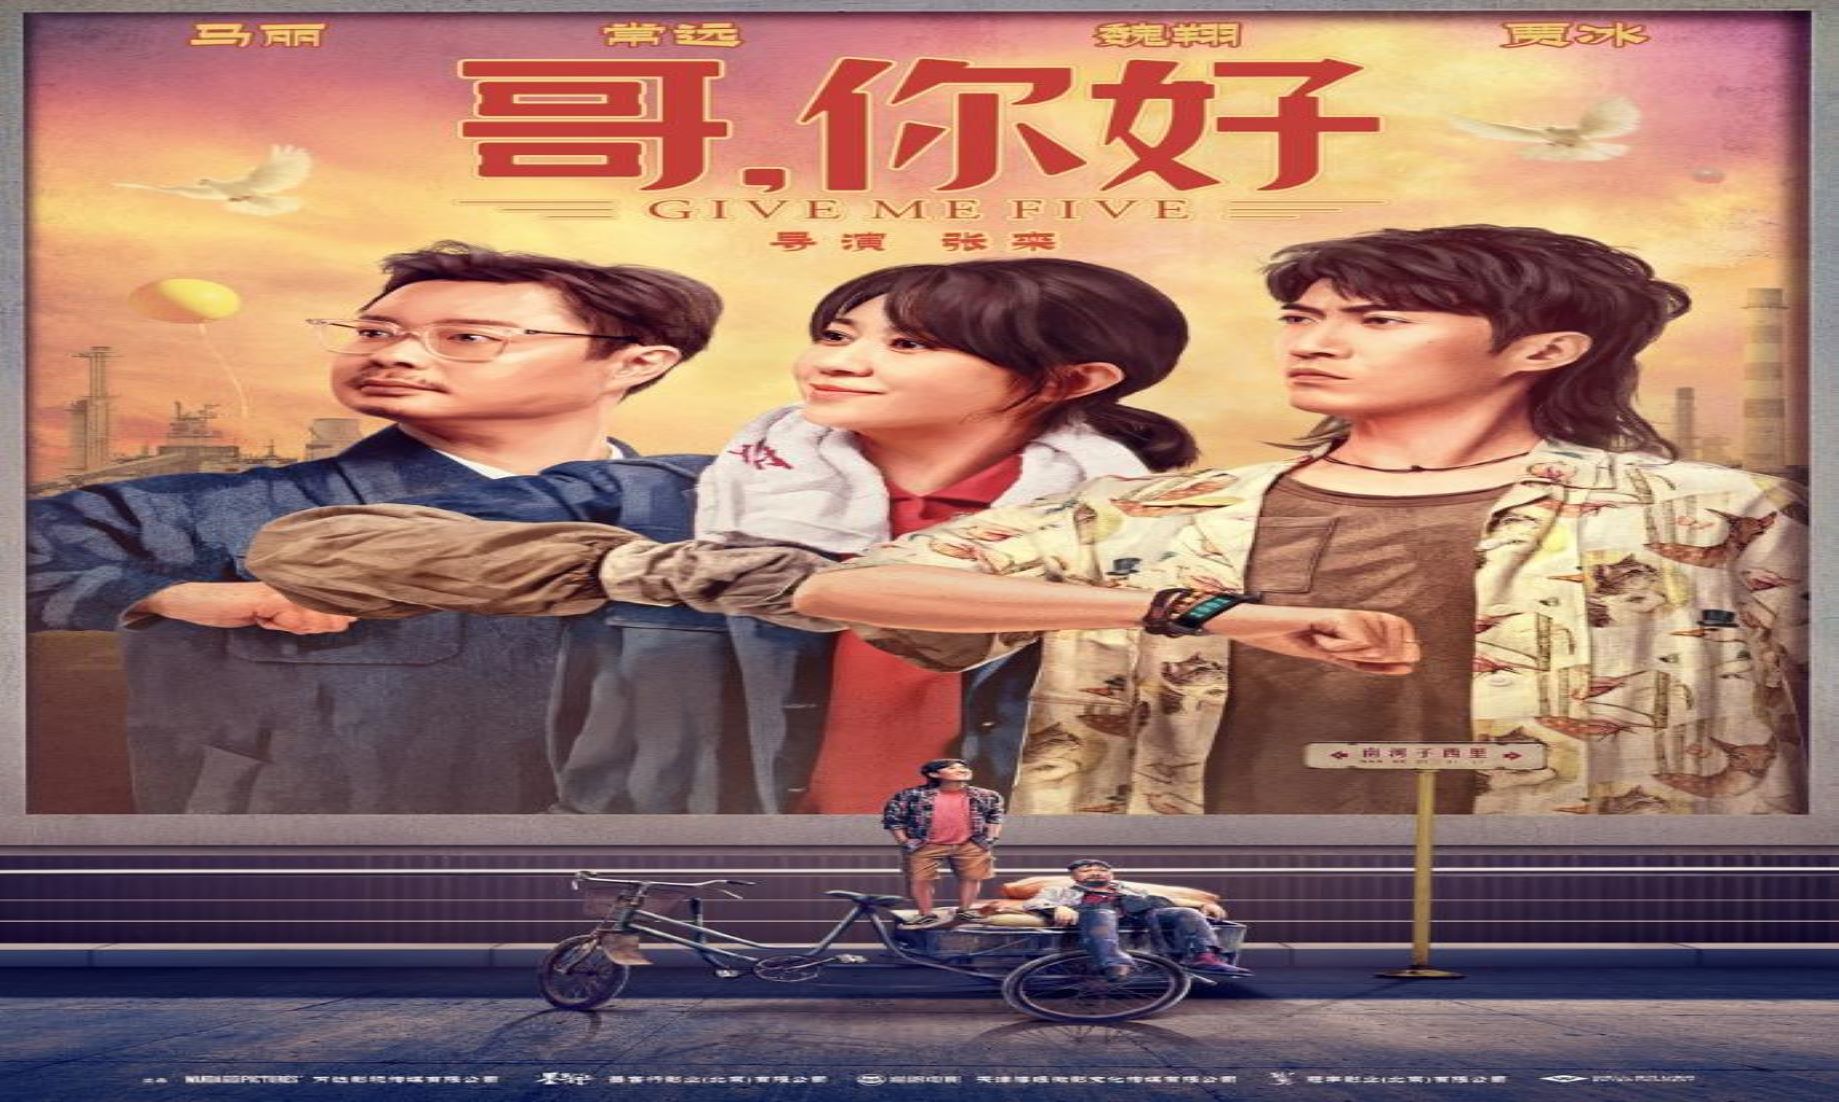 Chinese Comedy Drama Film “Give Me Five” Hit North American Big Screen